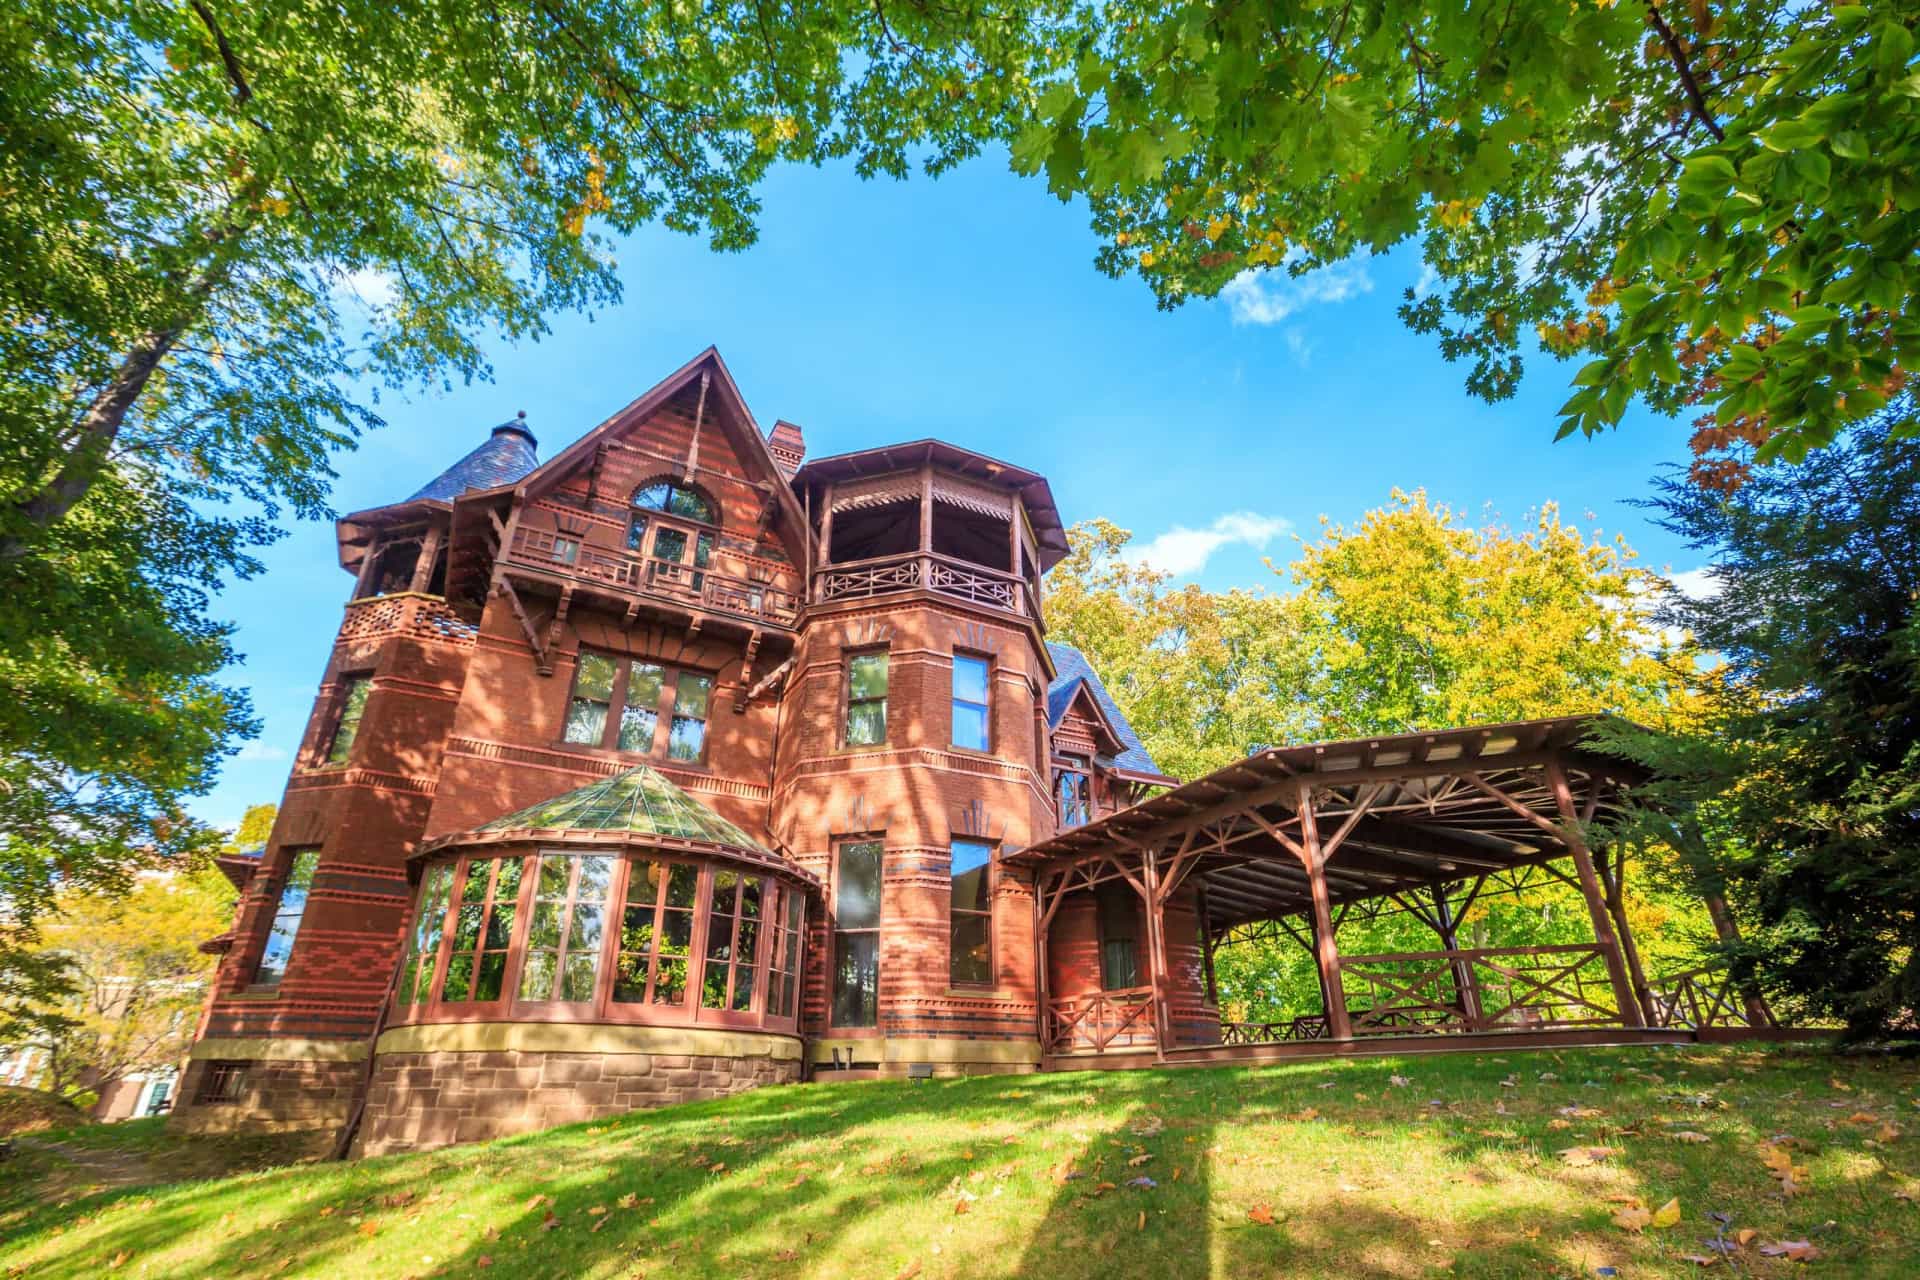 <p>One of the most visited buildings in Hartford and indeed the state is the Victorian Gothic mansion that <a href="https://www.starsinsider.com/lifestyle/506439/famous-authors-and-their-pen-names" rel="noopener">Samuel Clemens</a> (aka Mark Twain) and his family called home from 1874 to 1891. It's here that Twain wrote 'The Adventures of Tom Sawyer' and 'Adventures of Huckleberry Finn,' among other novels. A tour of the property reveals fascinating insights into the life and work of the acclaimed author.</p><p>You may also like: <a href="https://www.starsinsider.com/n/217575?utm_source=msn.com&utm_medium=display&utm_campaign=referral_description&utm_content=513982en-us">Autistic celebrities changing our perceptions</a></p>